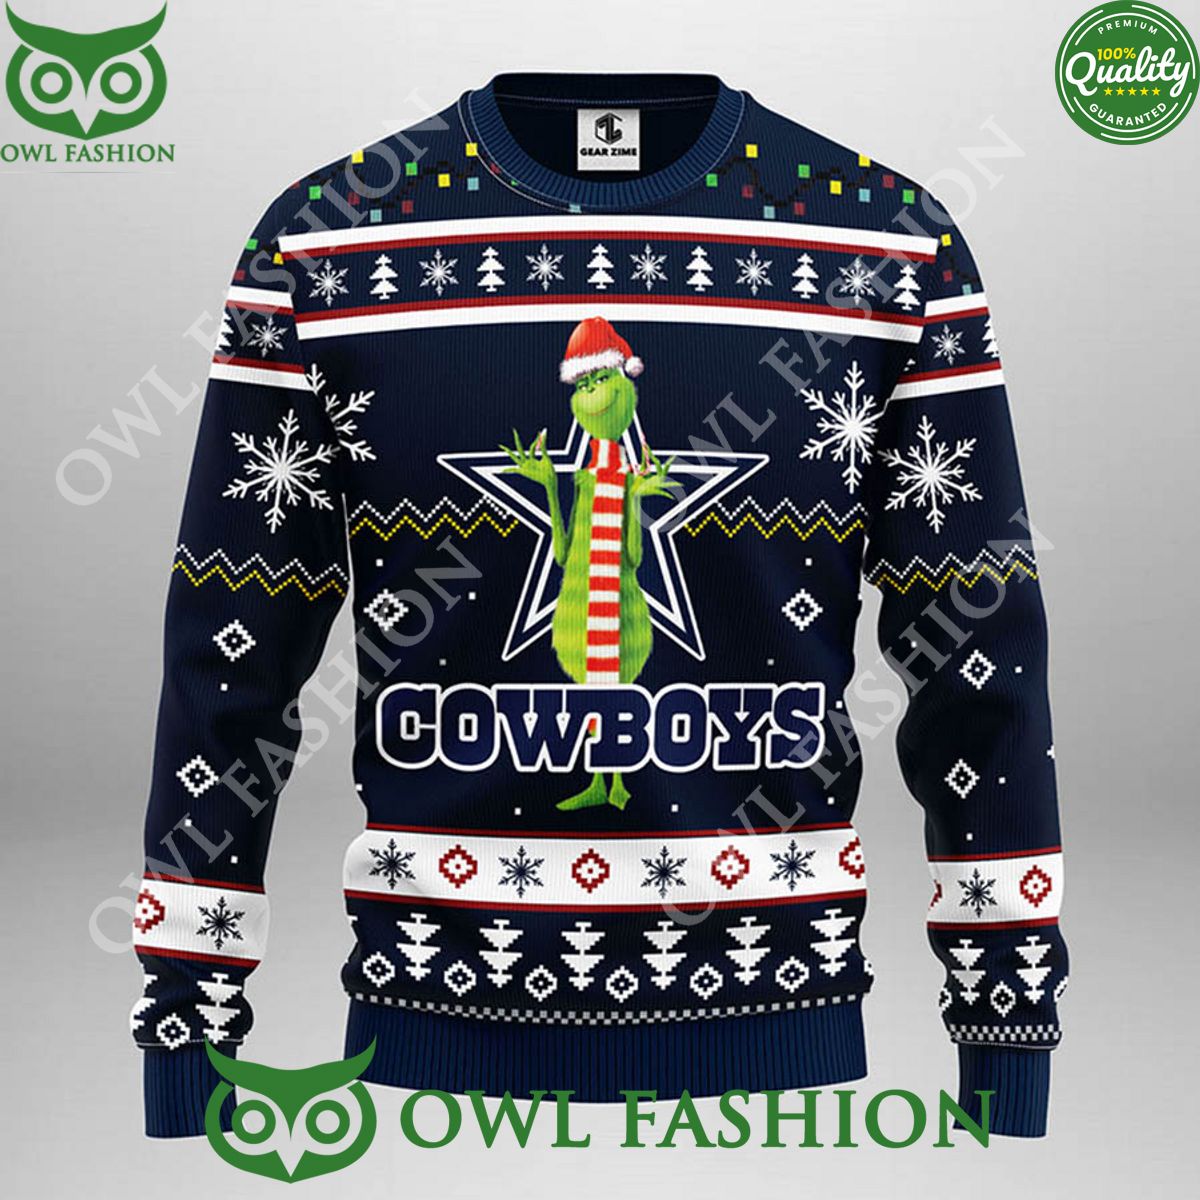 grinch stole christmas dallas cowboys funny nfl christmas ugly sweater jumper 1 6xAY9.jpg